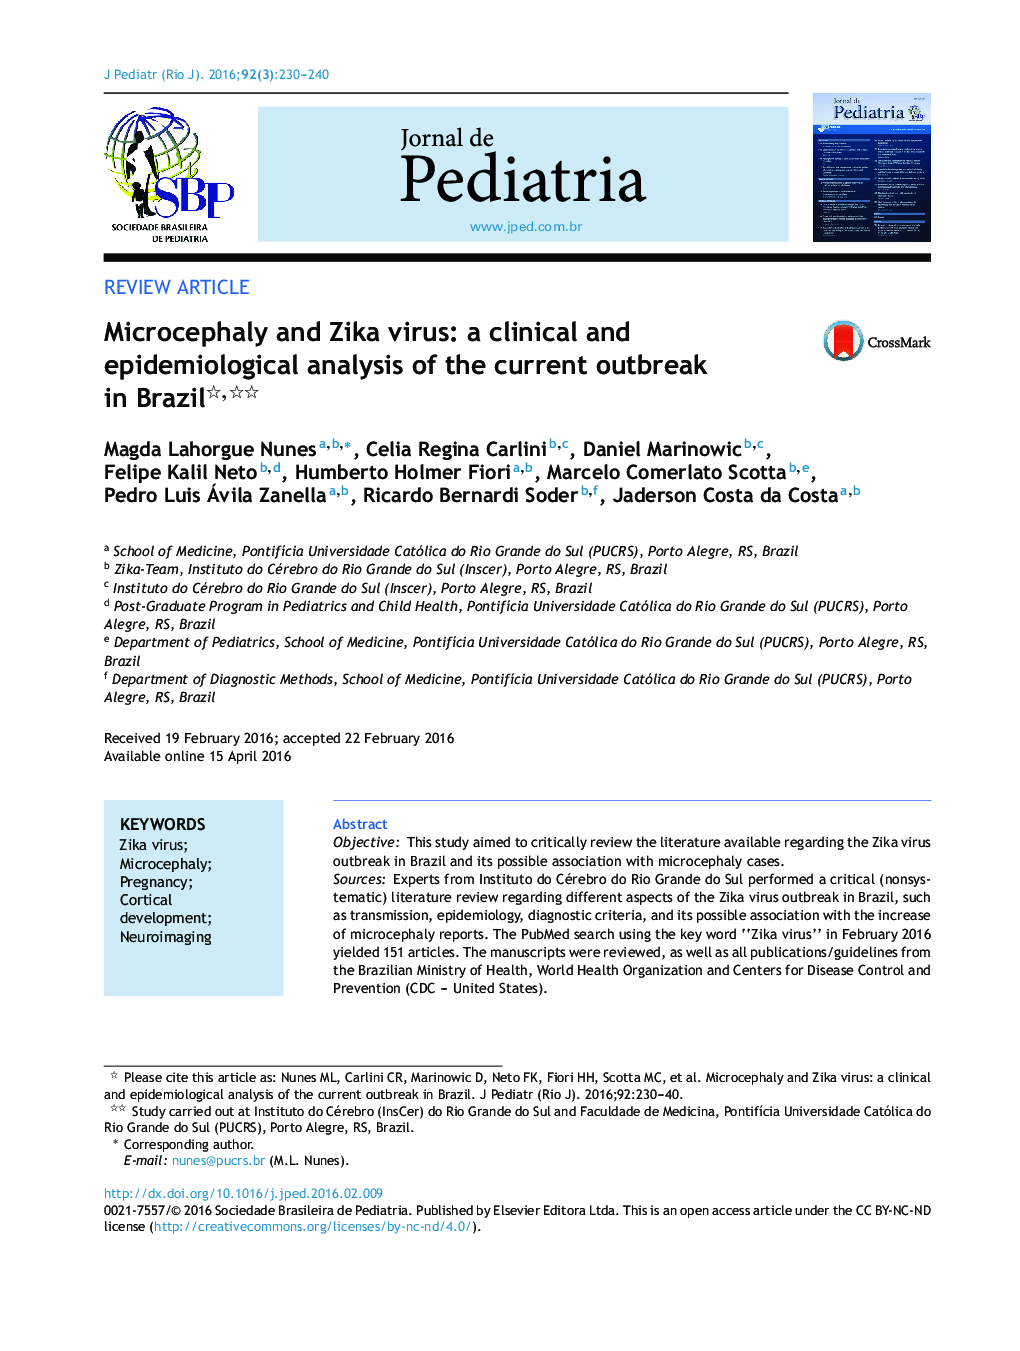 Microcephaly and Zika virus: a clinical and epidemiological analysis of the current outbreak in Brazil 